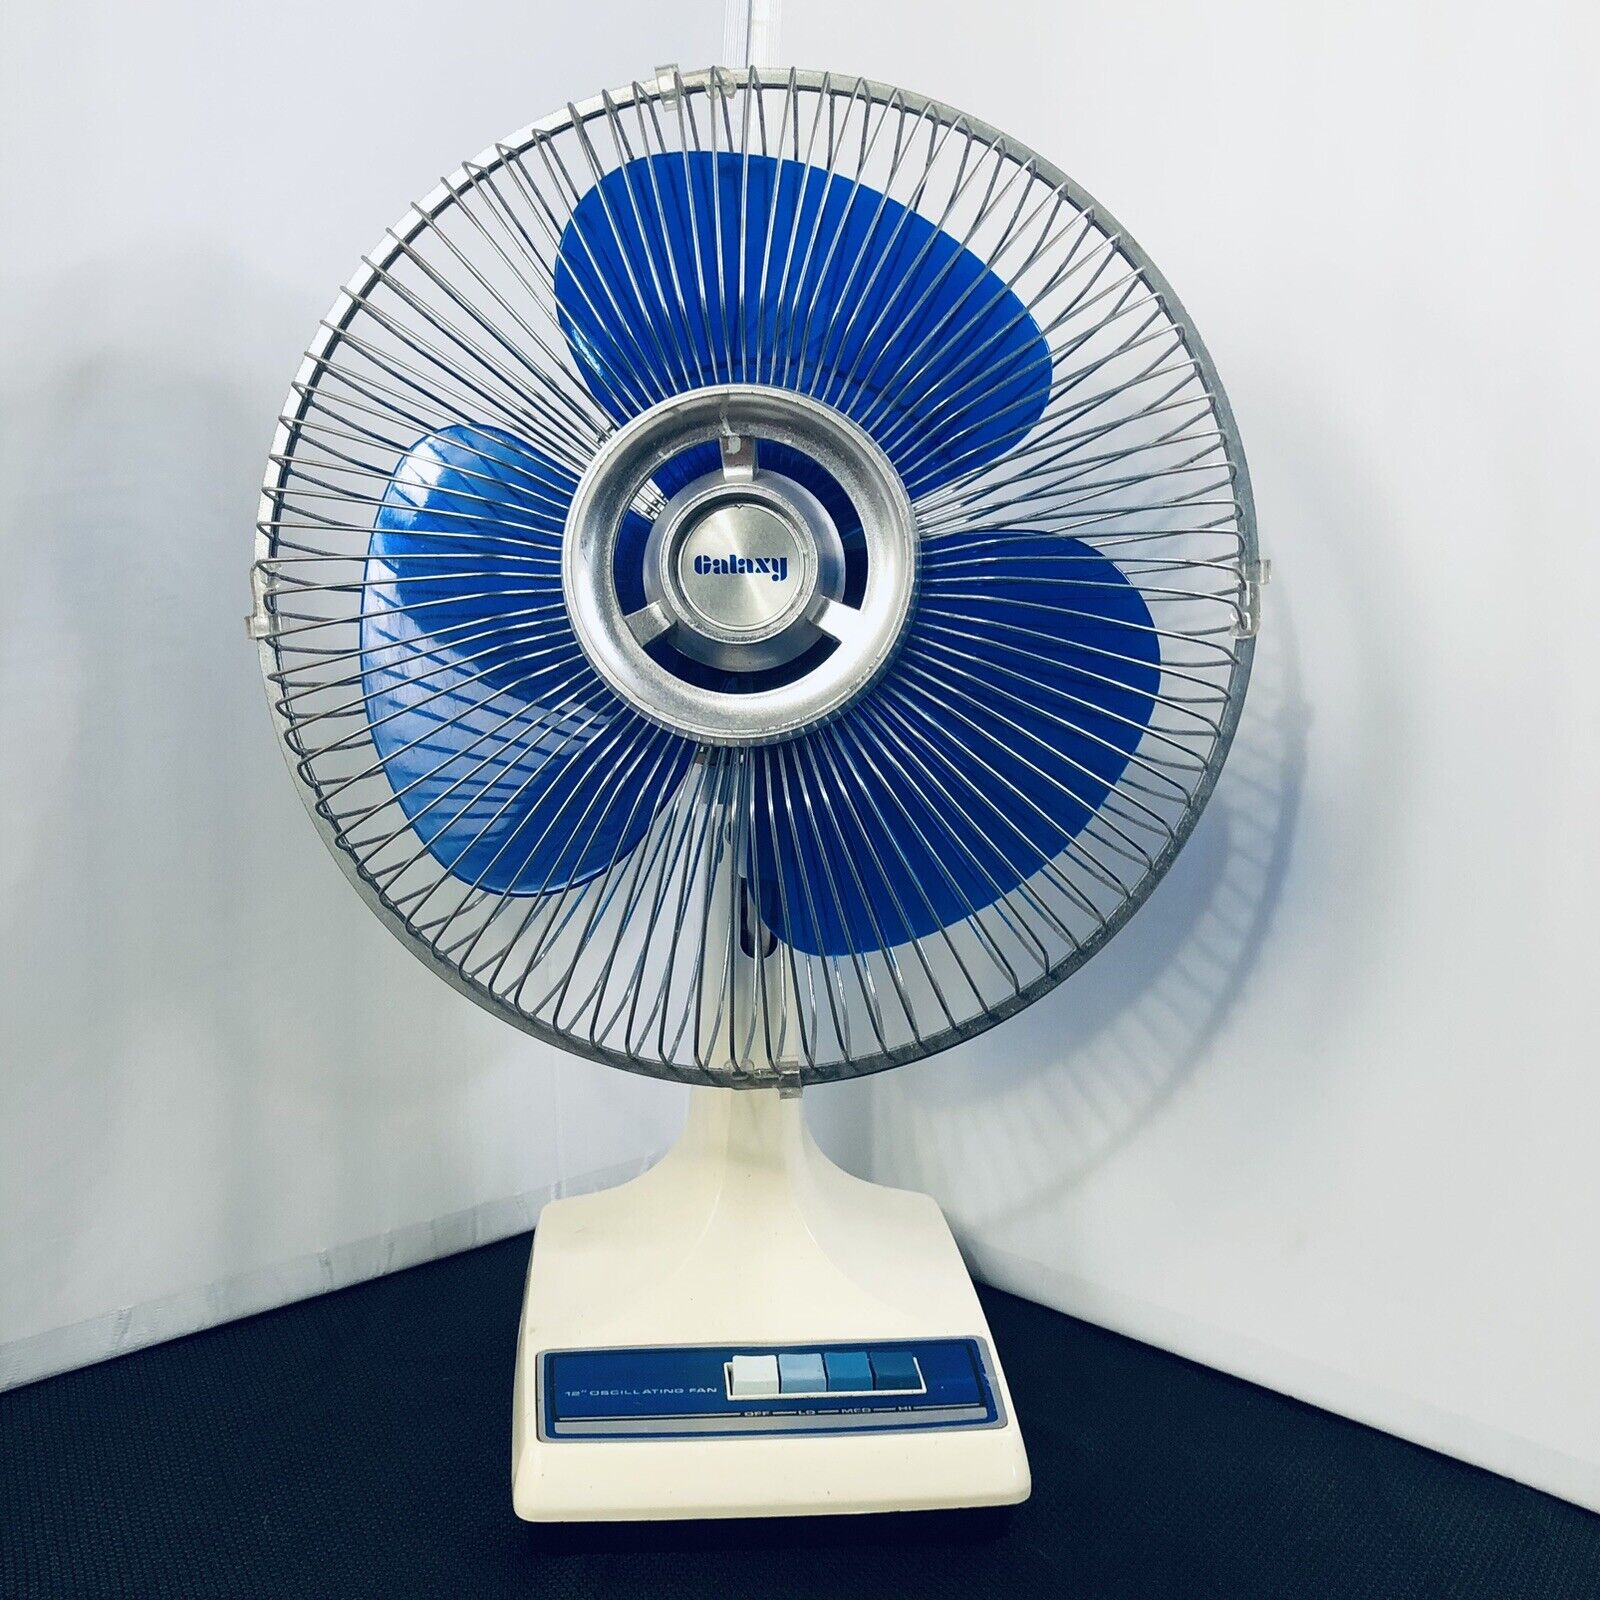 Vintage Galaxy 12” Oscillating 12-1 Blue Blades 3-Speed Fan Works Perfect Clean